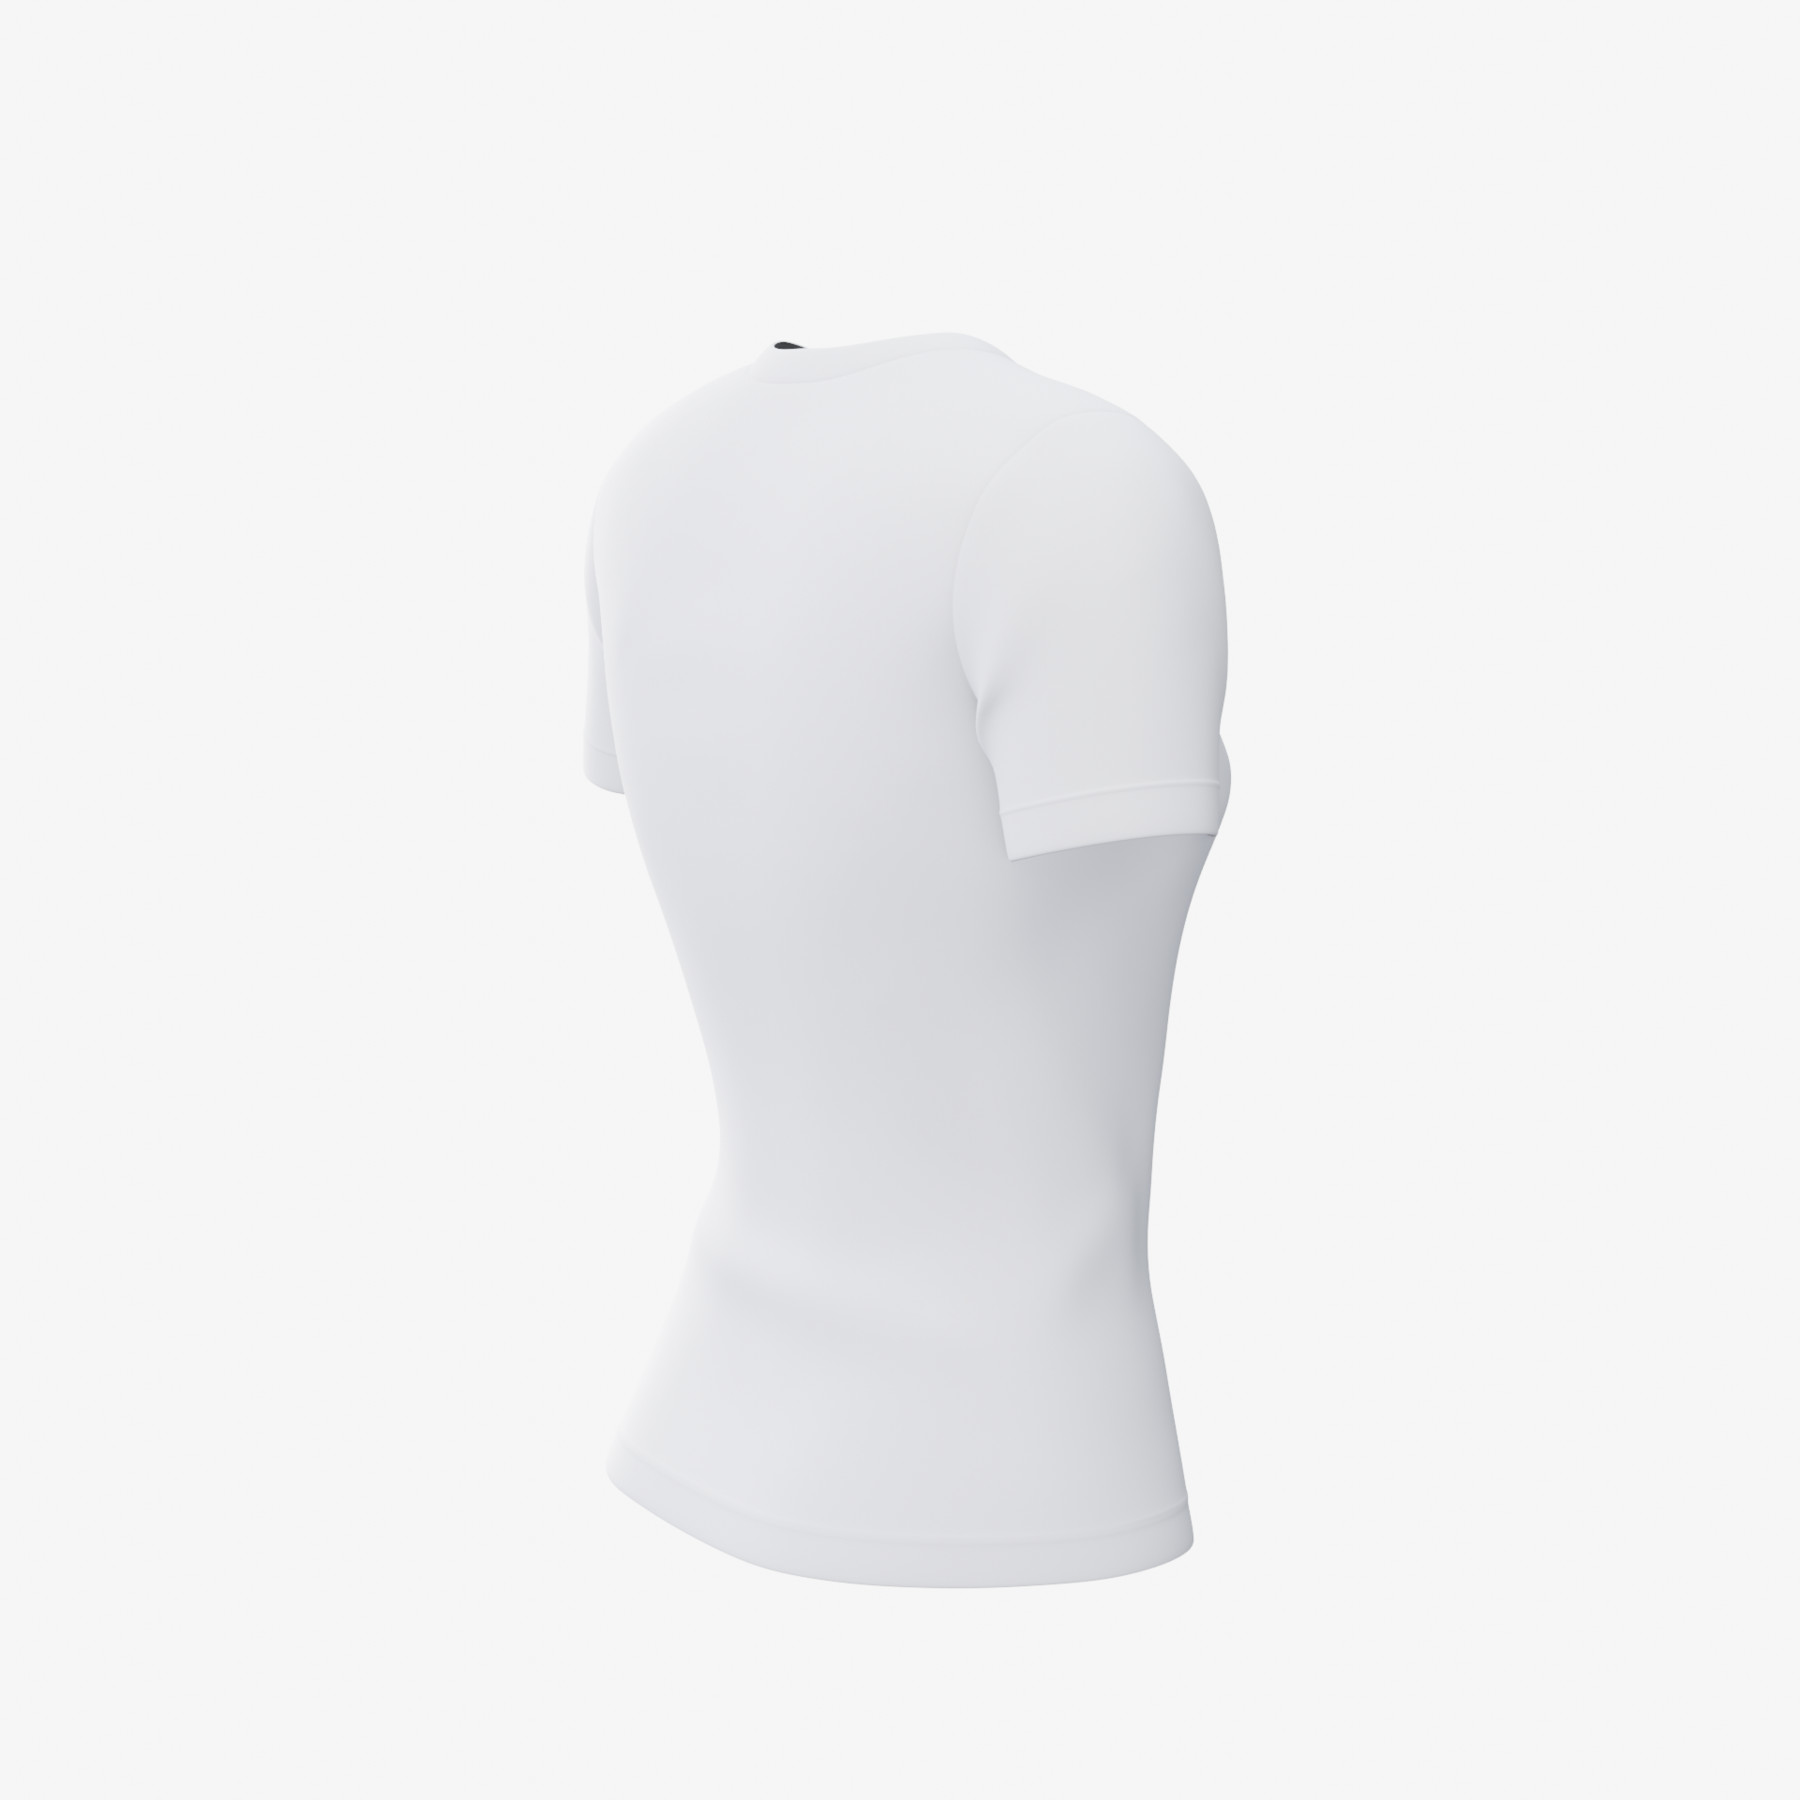 Mannequin Wearing Brand Off White T Shirt 3D Model $79 - .max .ma